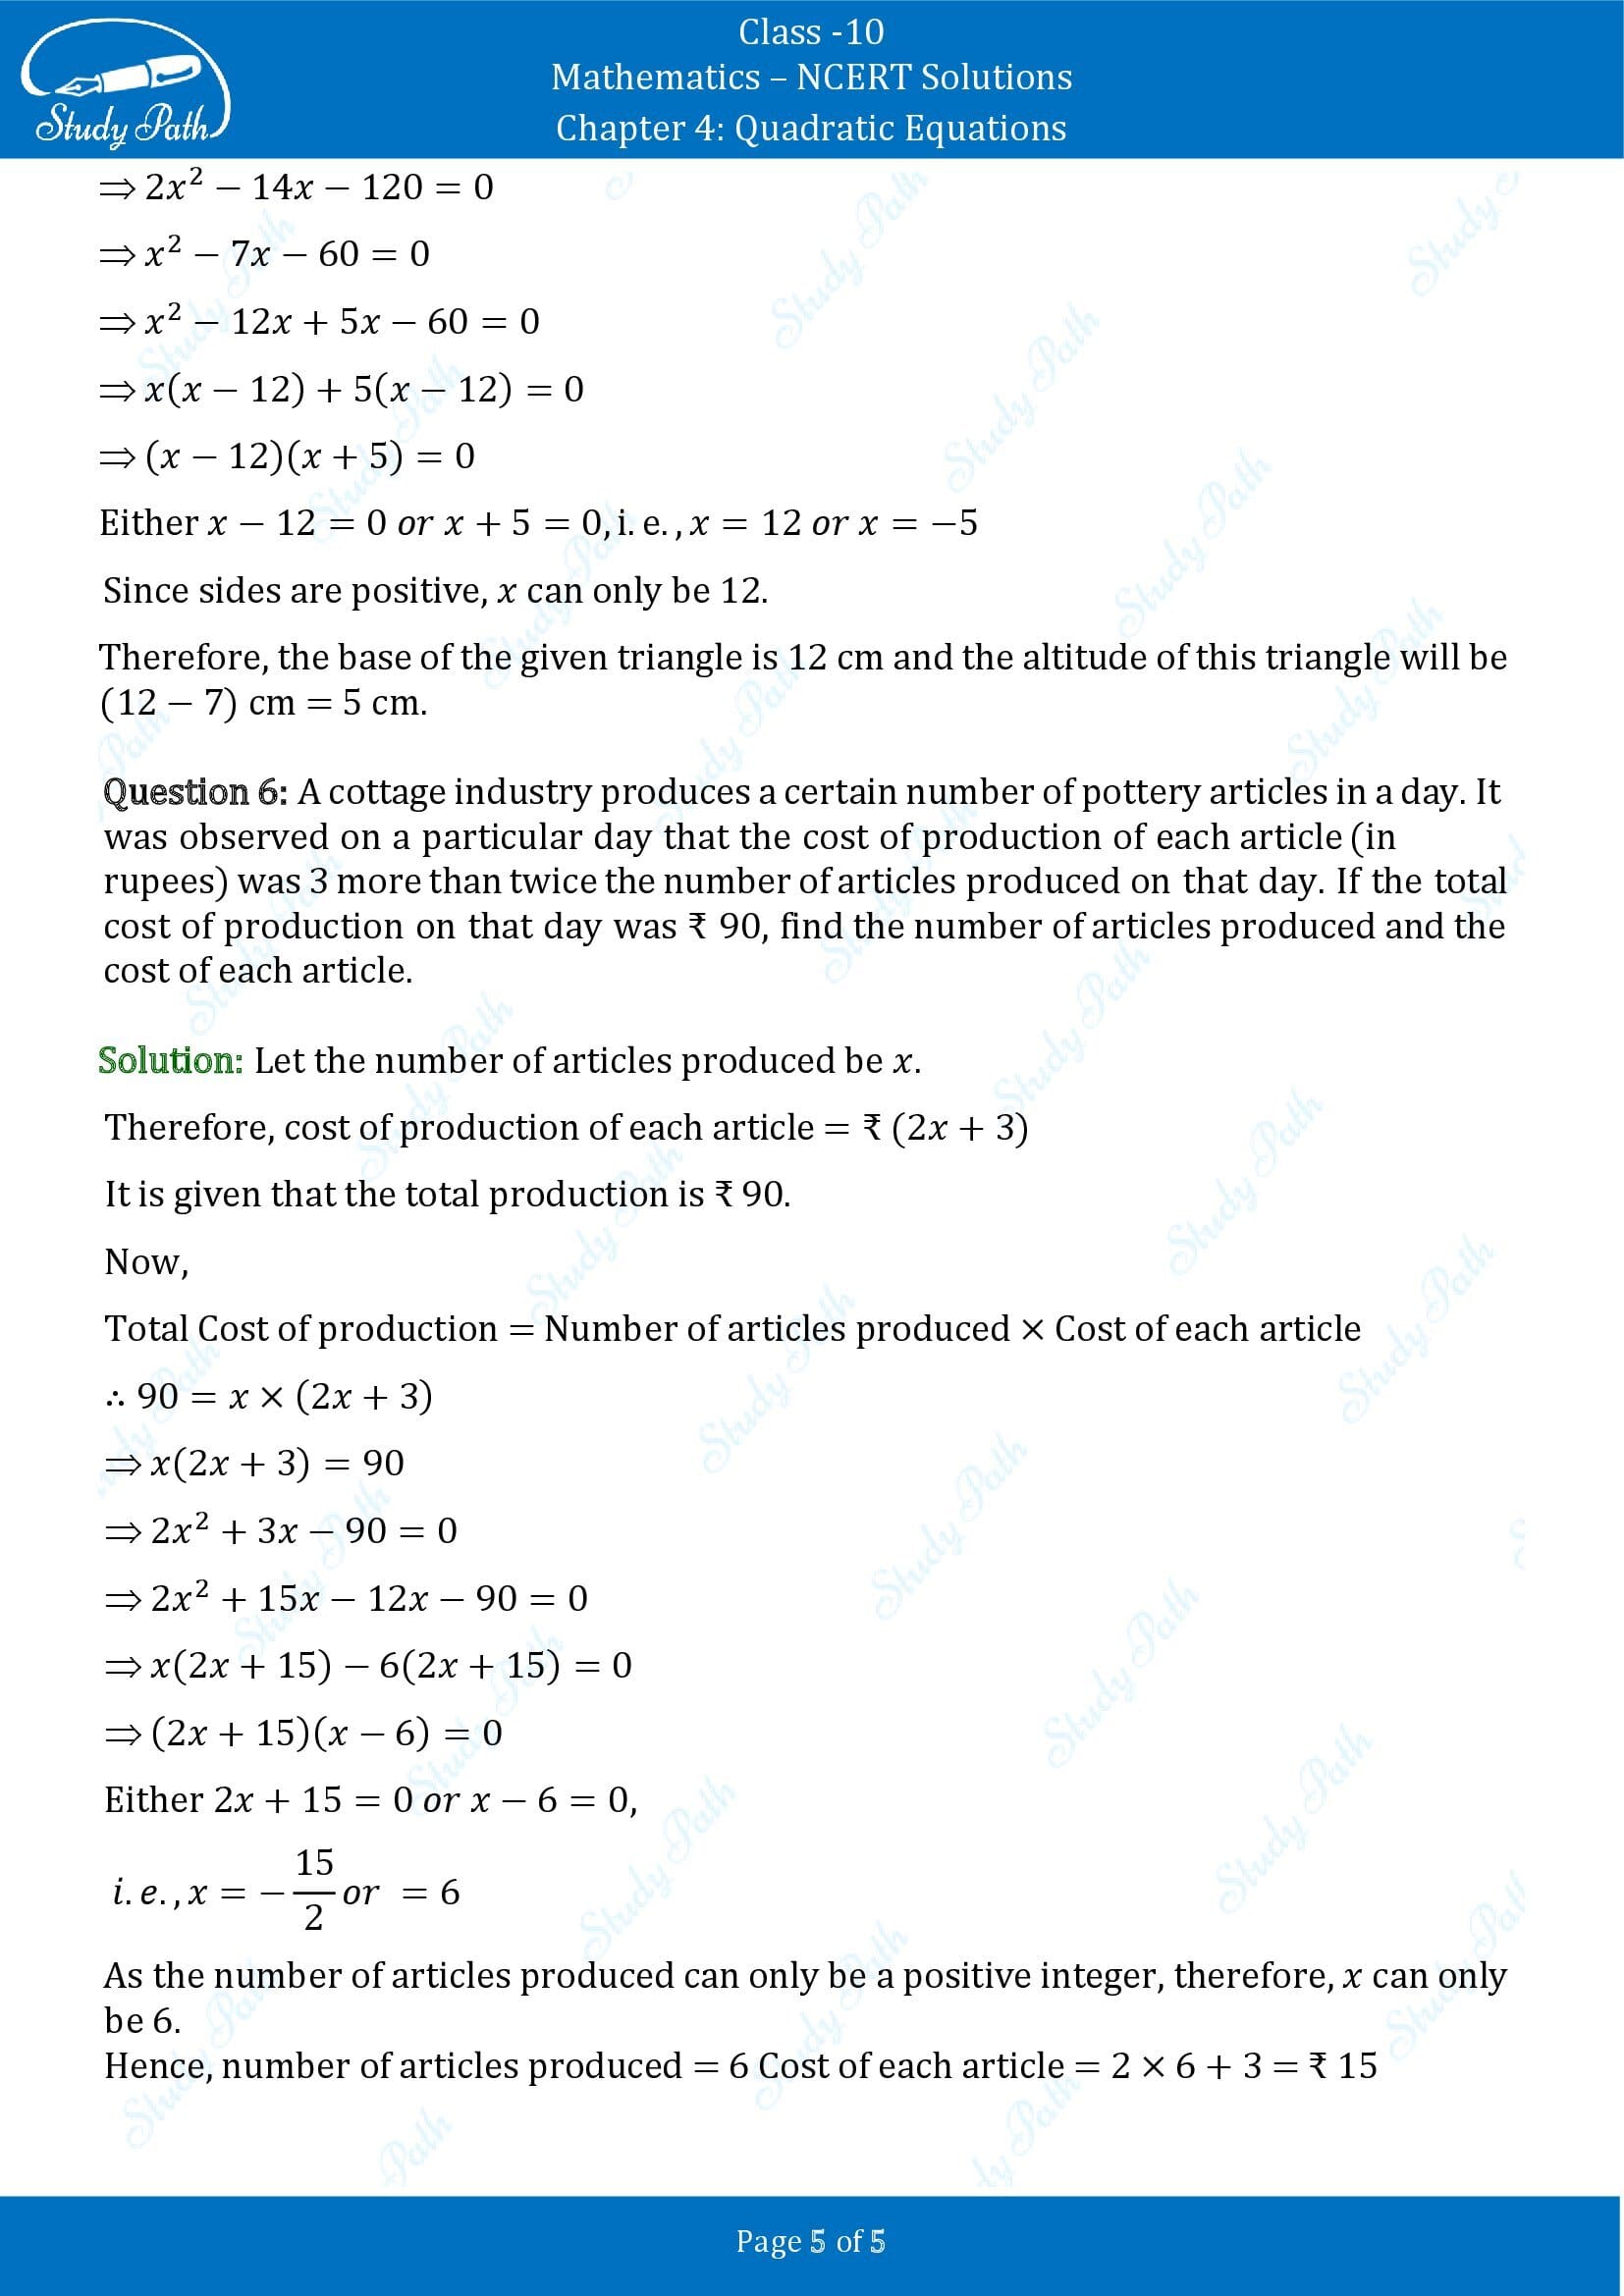 NCERT Solutions for Class 10 Maths Chapter 4 Quadratic Equations Exercise 4.2 00005